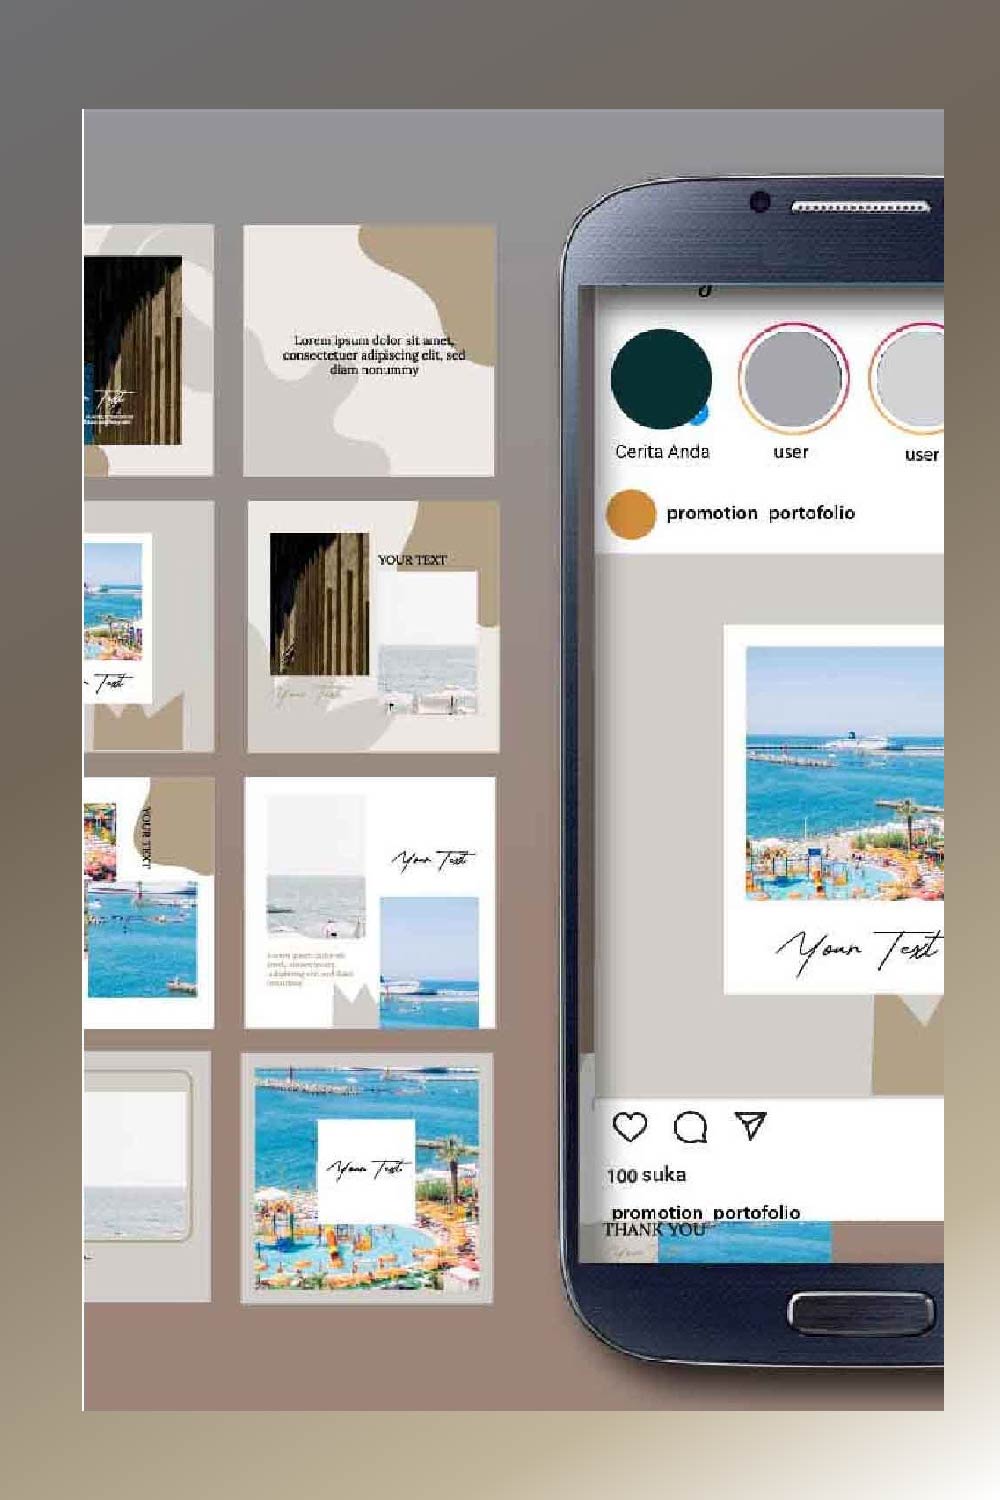 Aesthetic instagram feed with fun shape pinterest preview image.